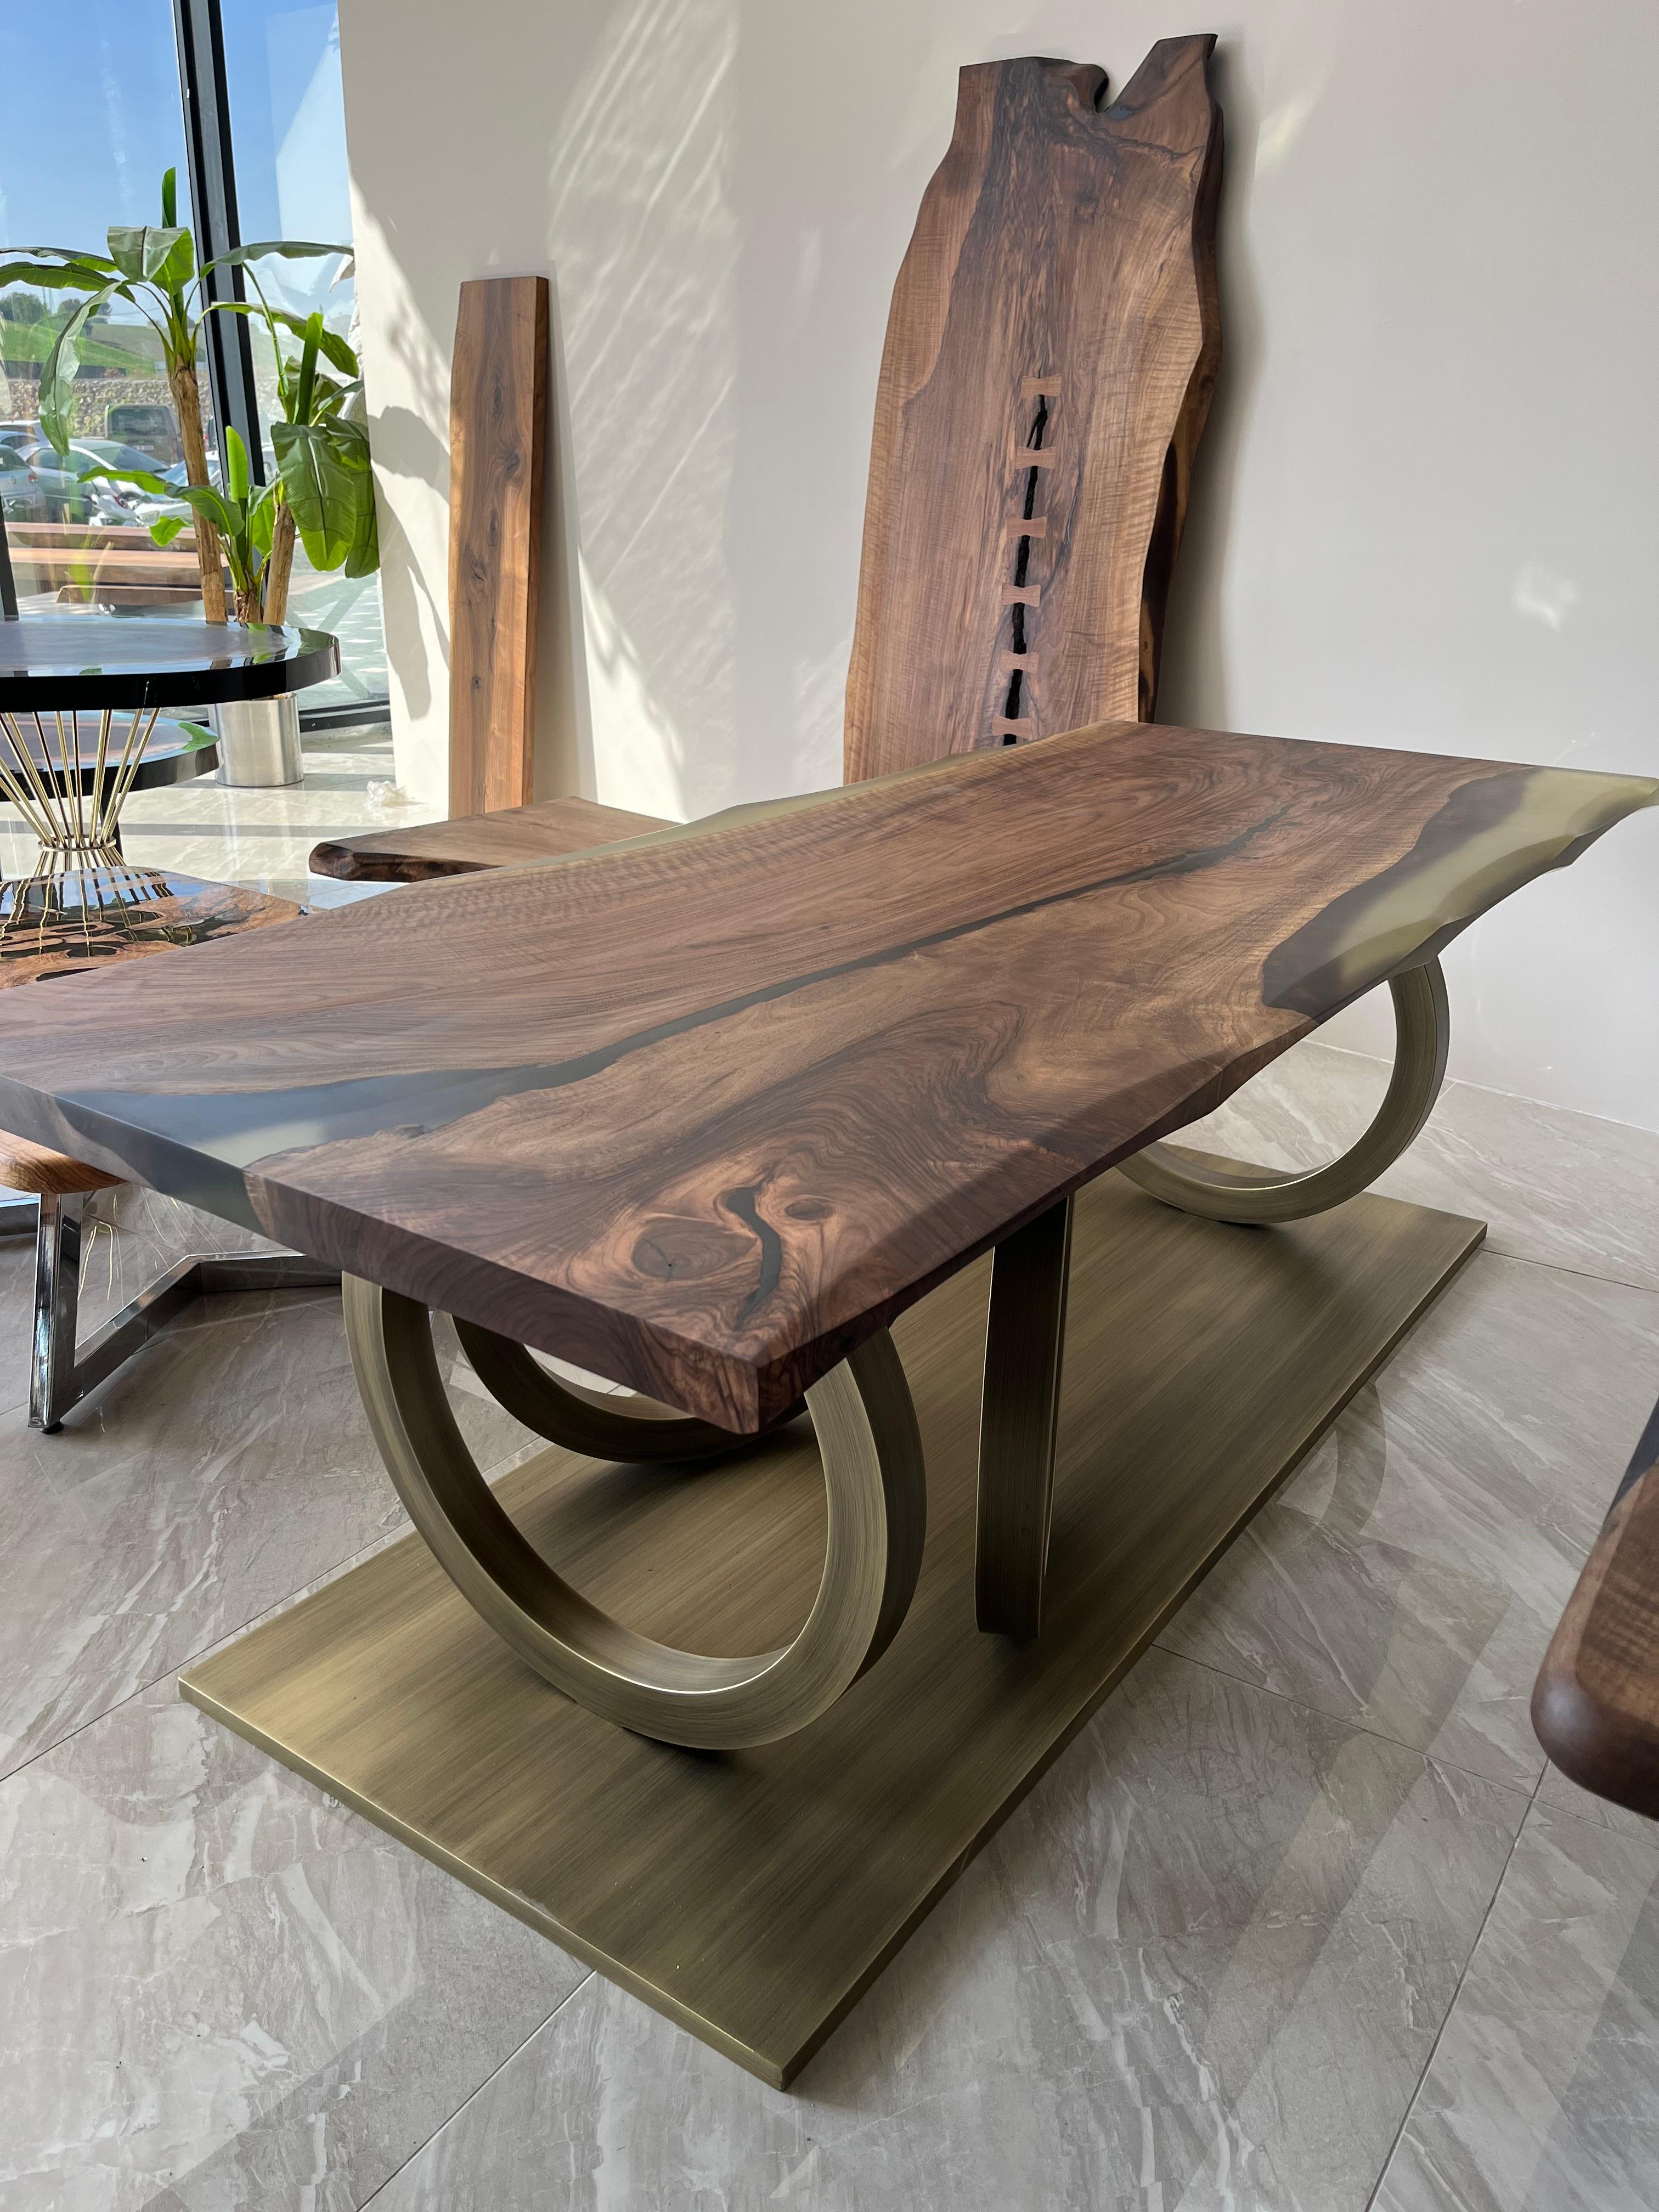 One-Piece Walnut Epoxy Resin Table

This table is made of walnut wood & green epoxy. 

Custom sizes, colours and finishes are available!